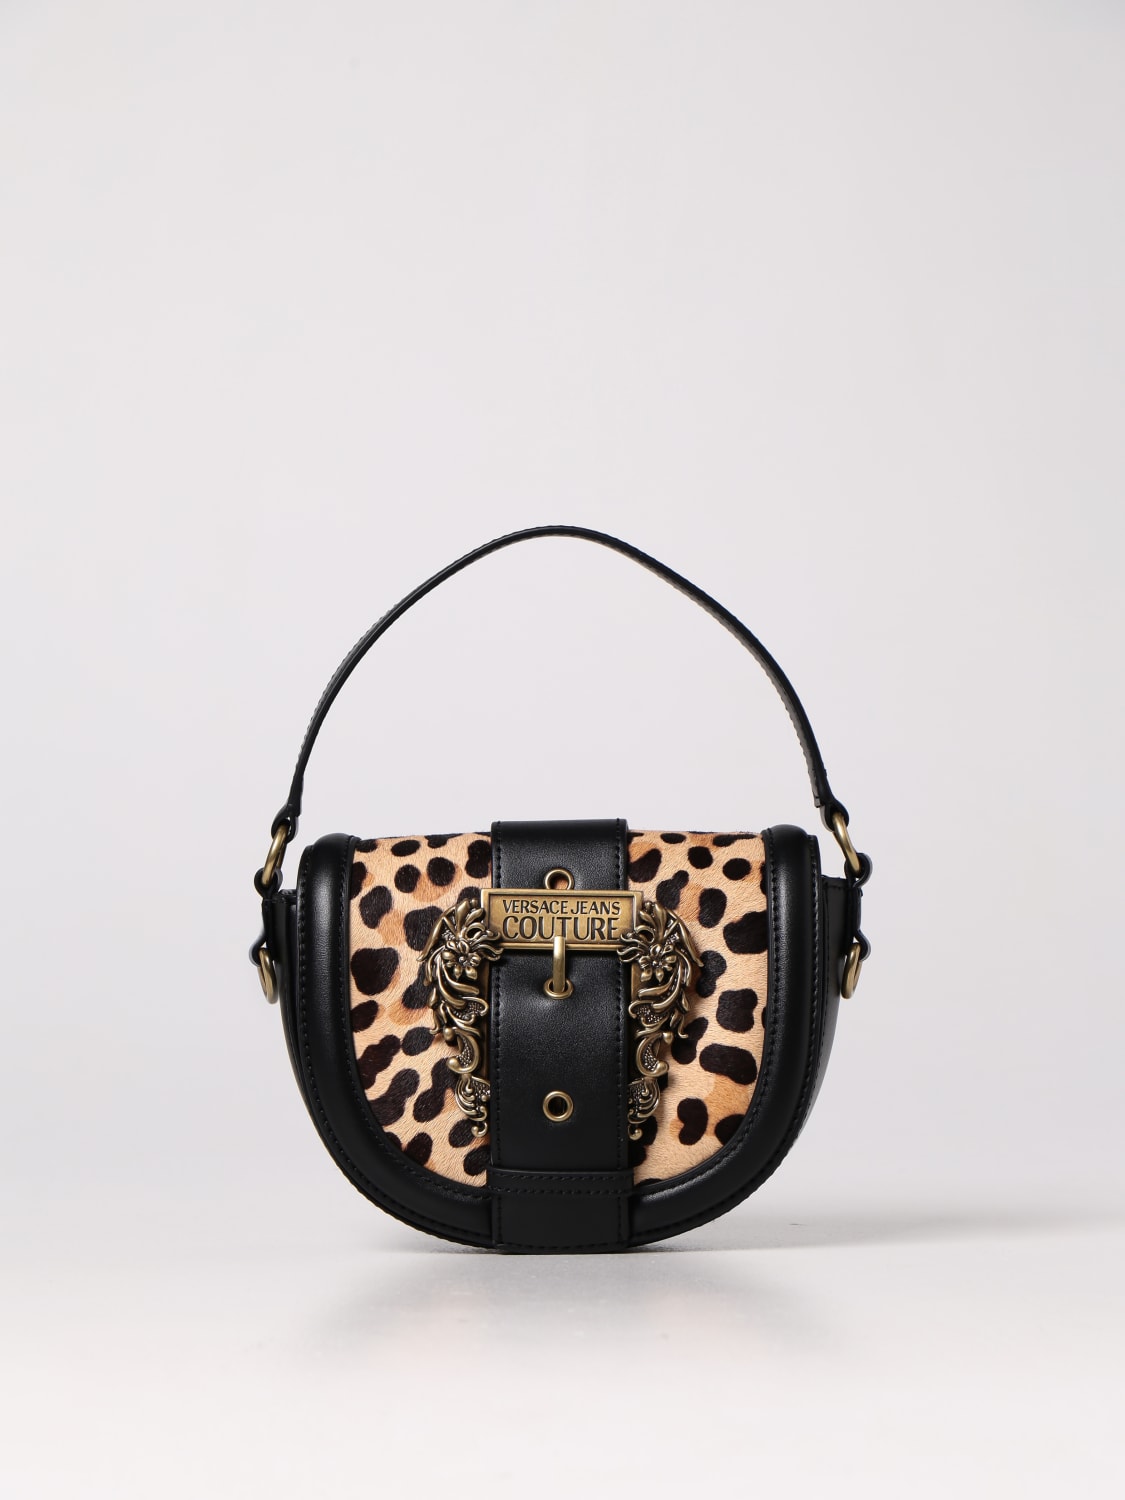 Borsa Versace Jeans Couture in pelle